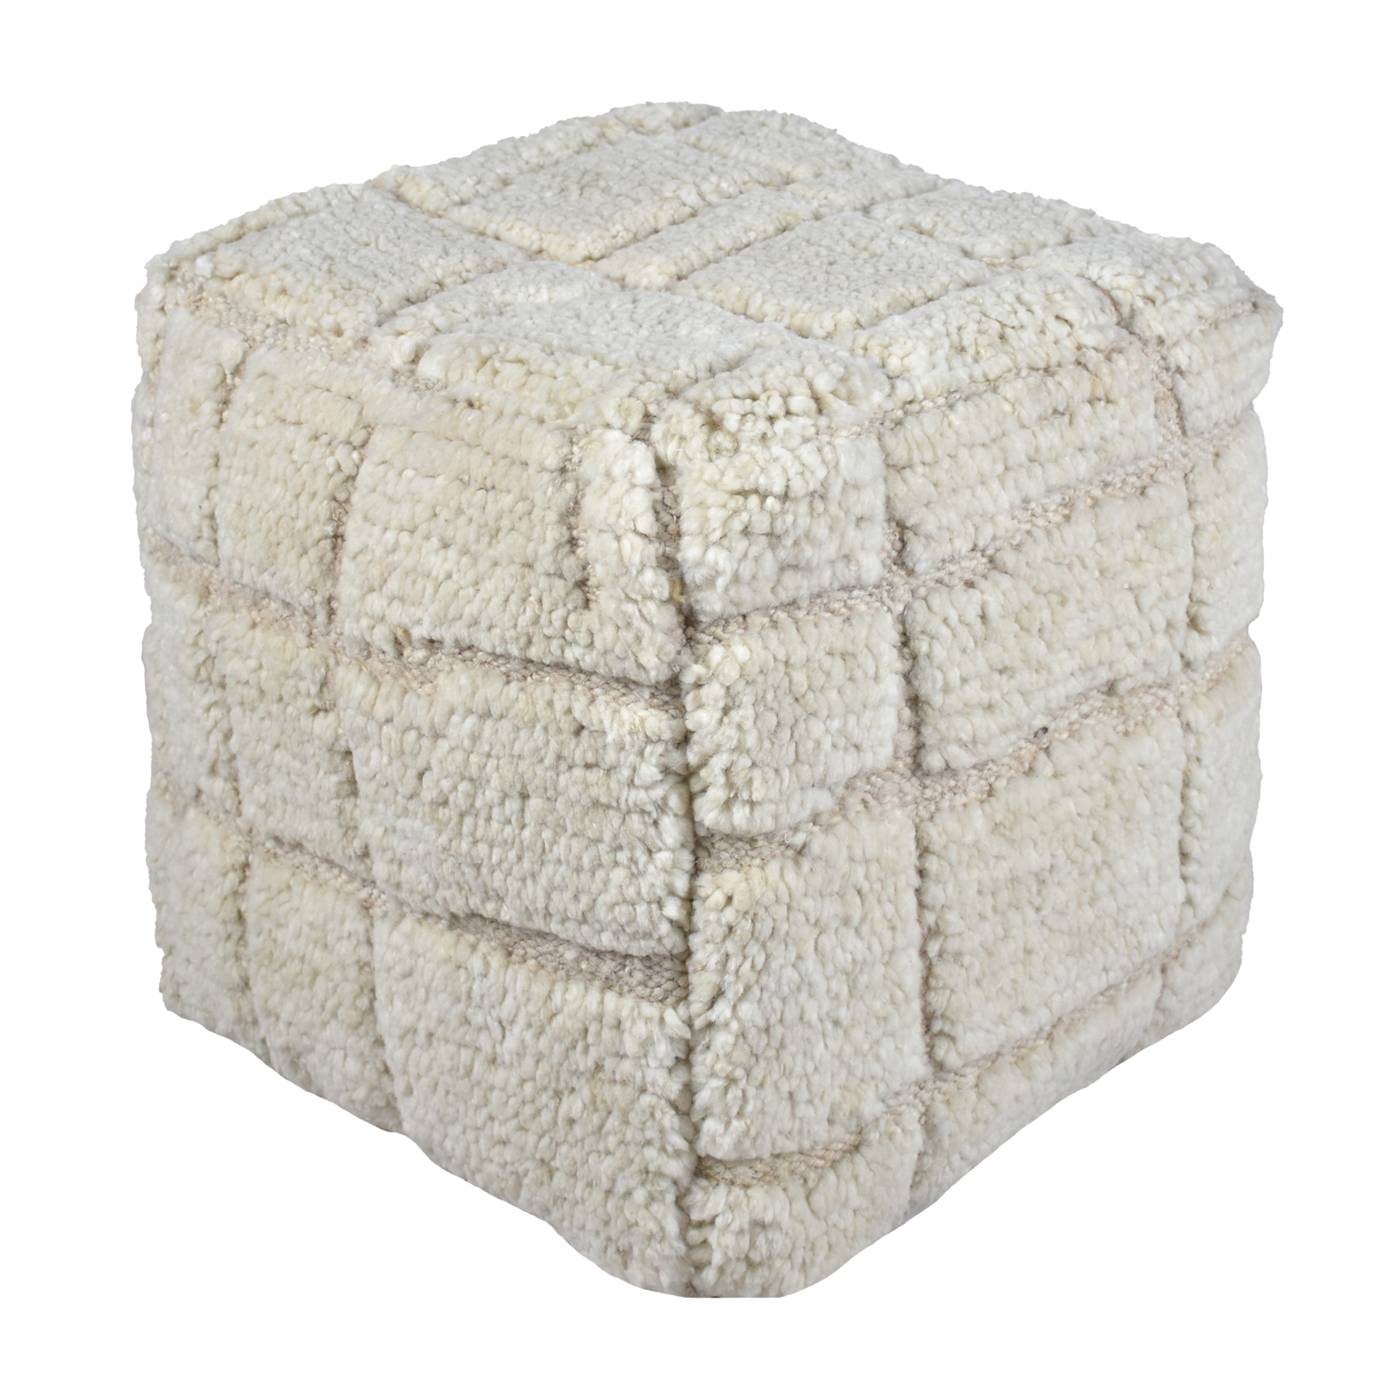 Luxton Pouf, 40x40x40 cm, Natural White, NZ Wool, Hand Knotted, Handknotted, All Cut